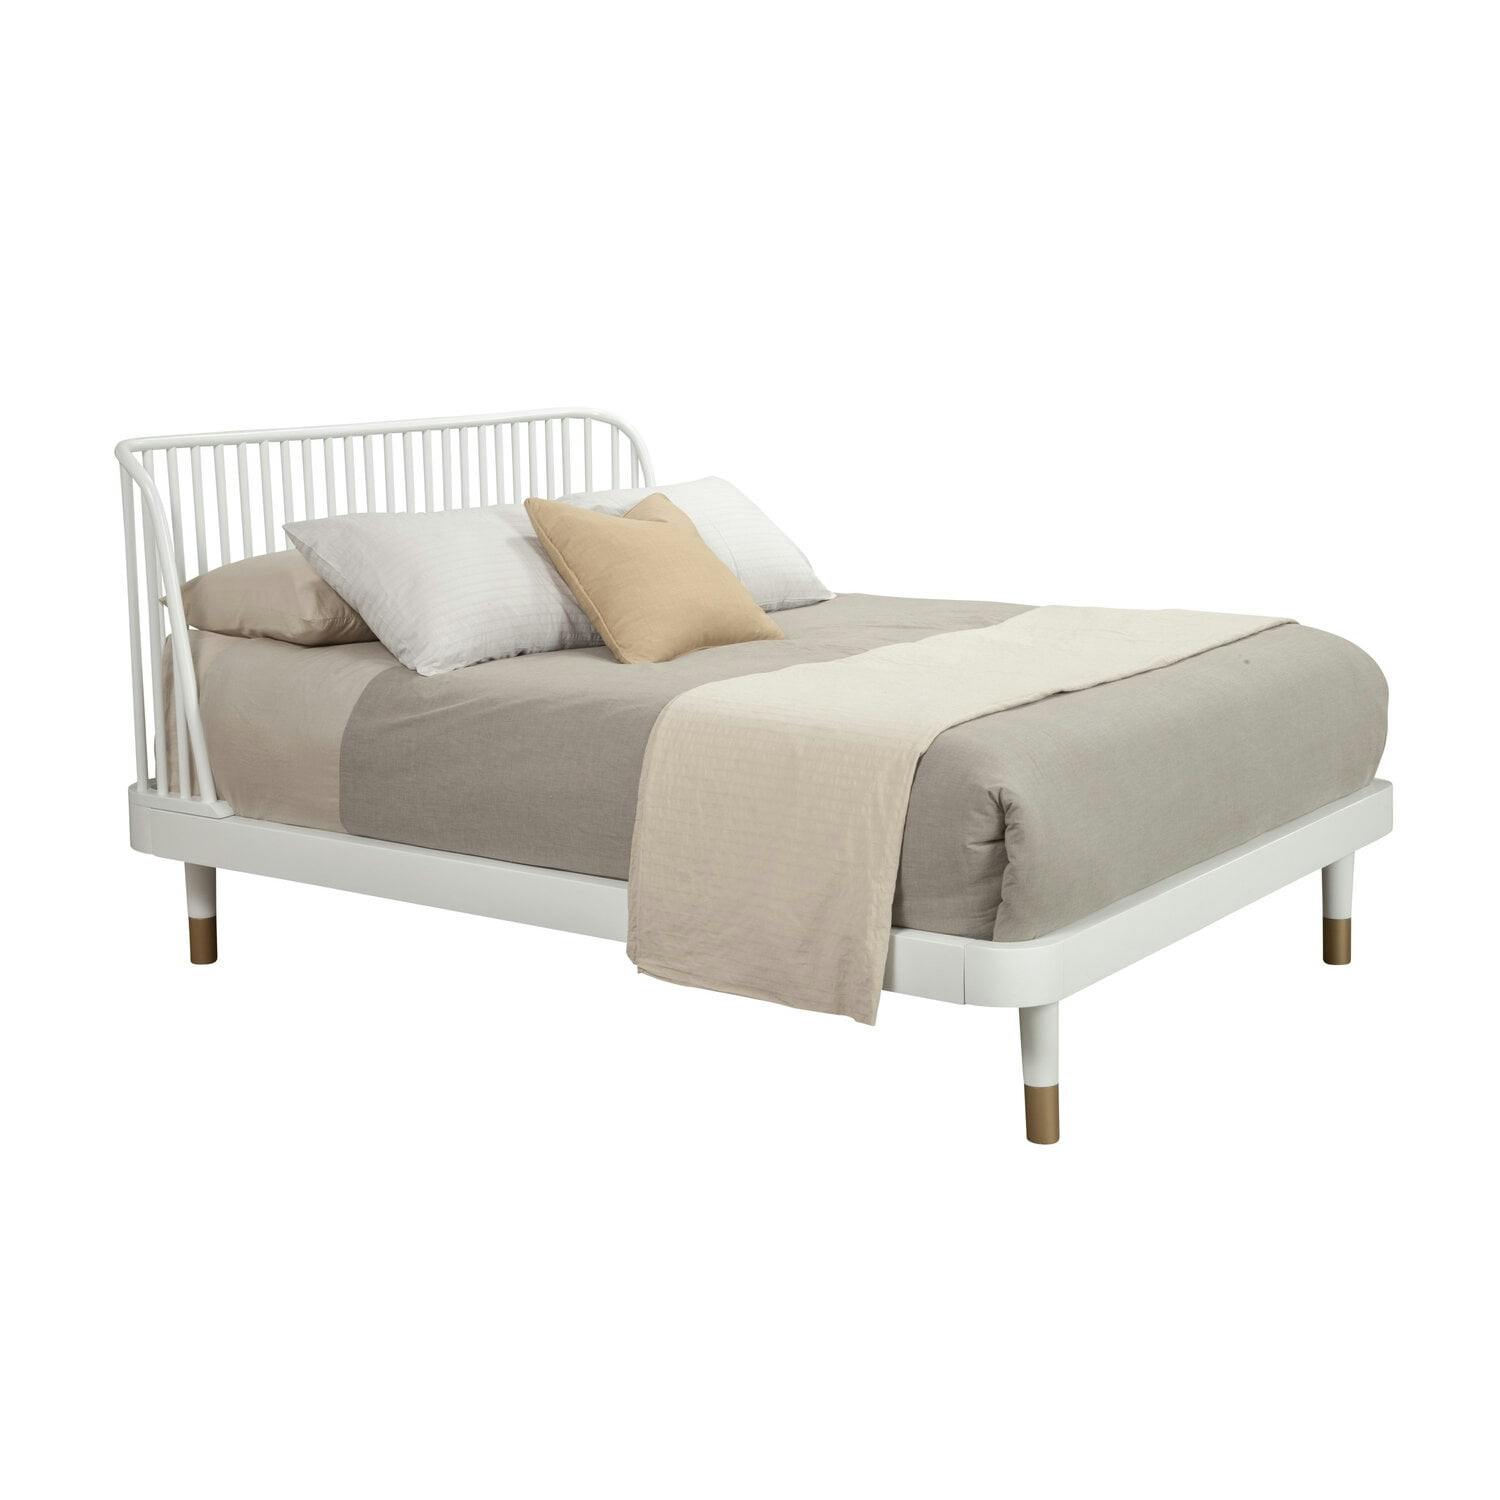 Madelyn Contemporary White Mahogany King Platform Bed with Upholstered Headboard